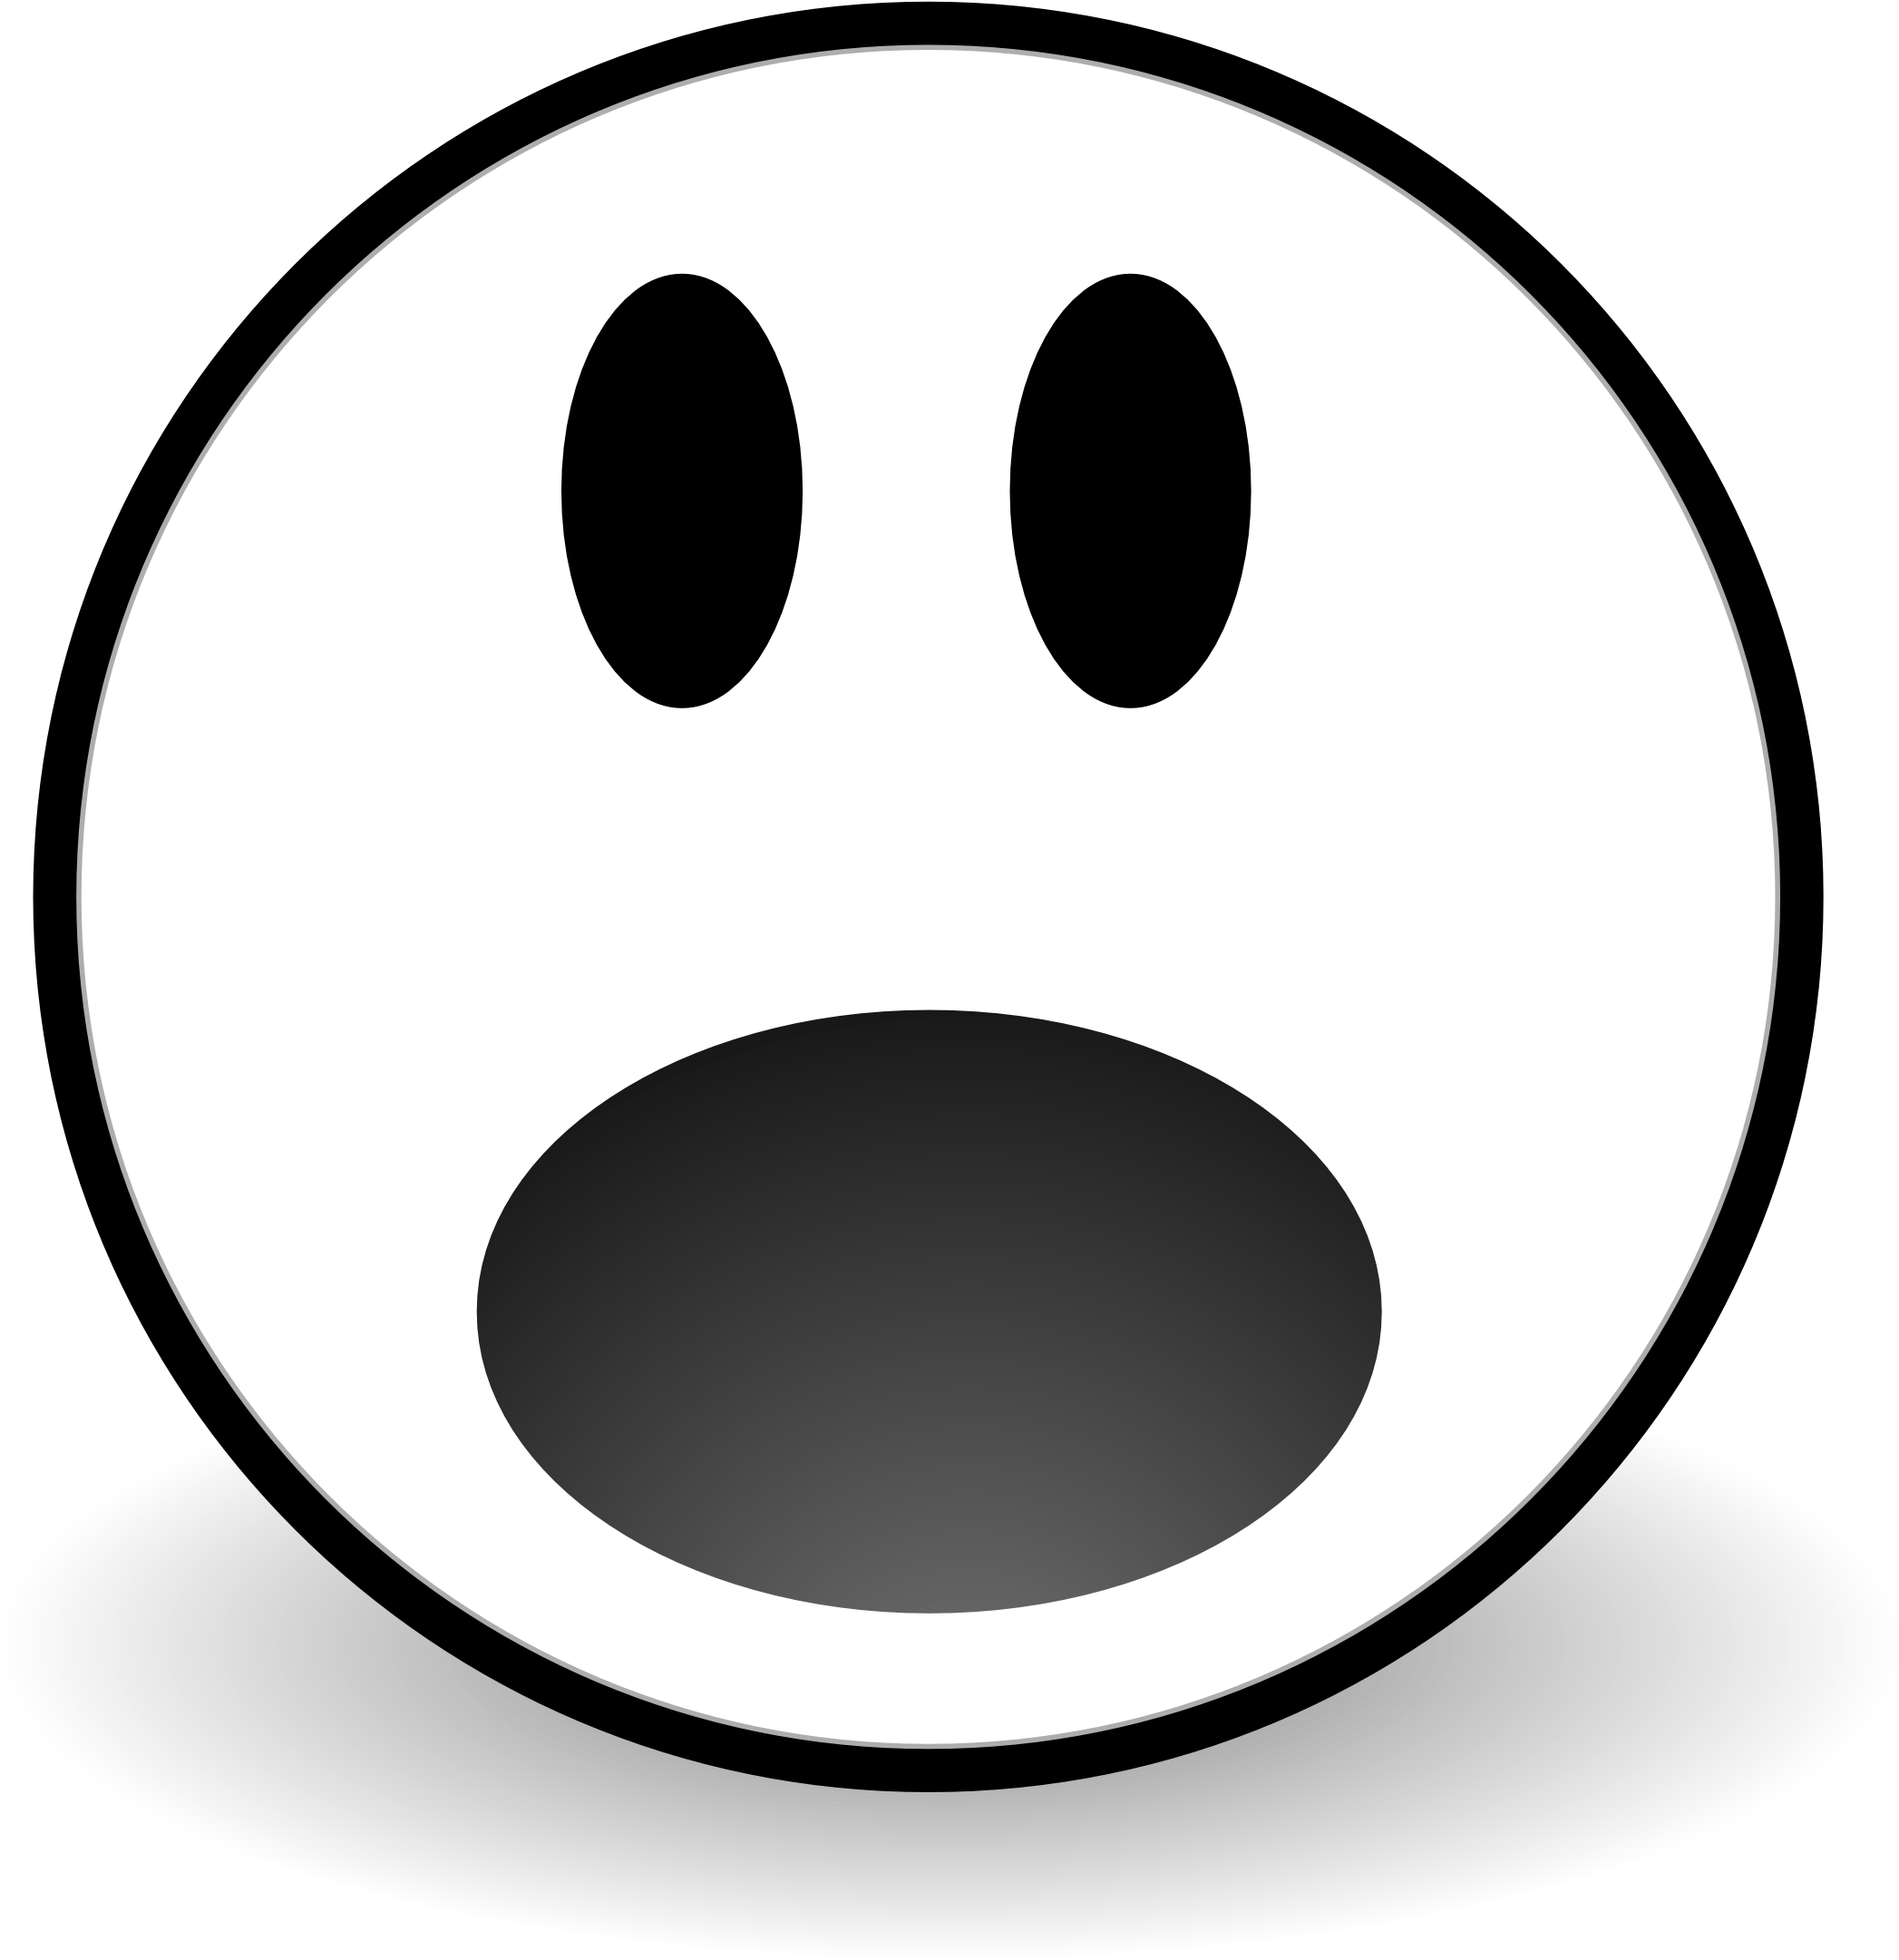 Smiley Faces Black And White Clipart.